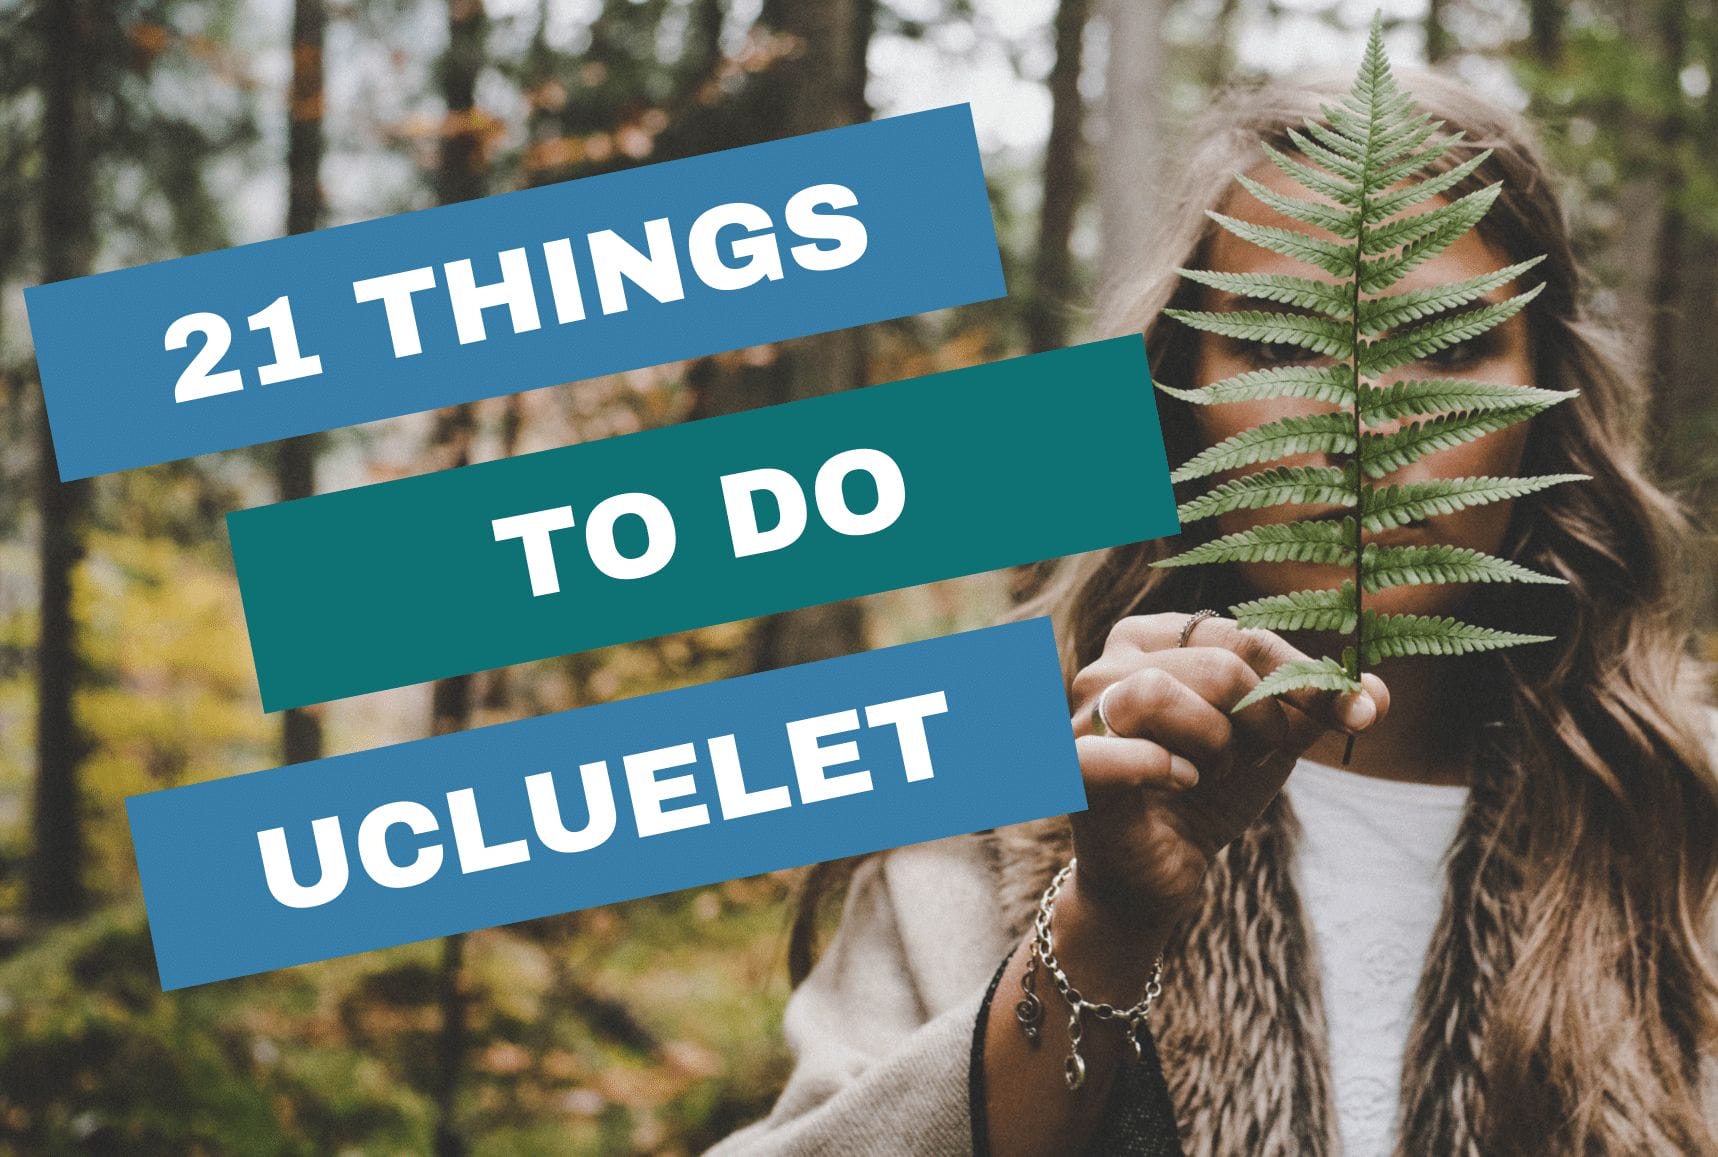 21 things to do in ucluelet